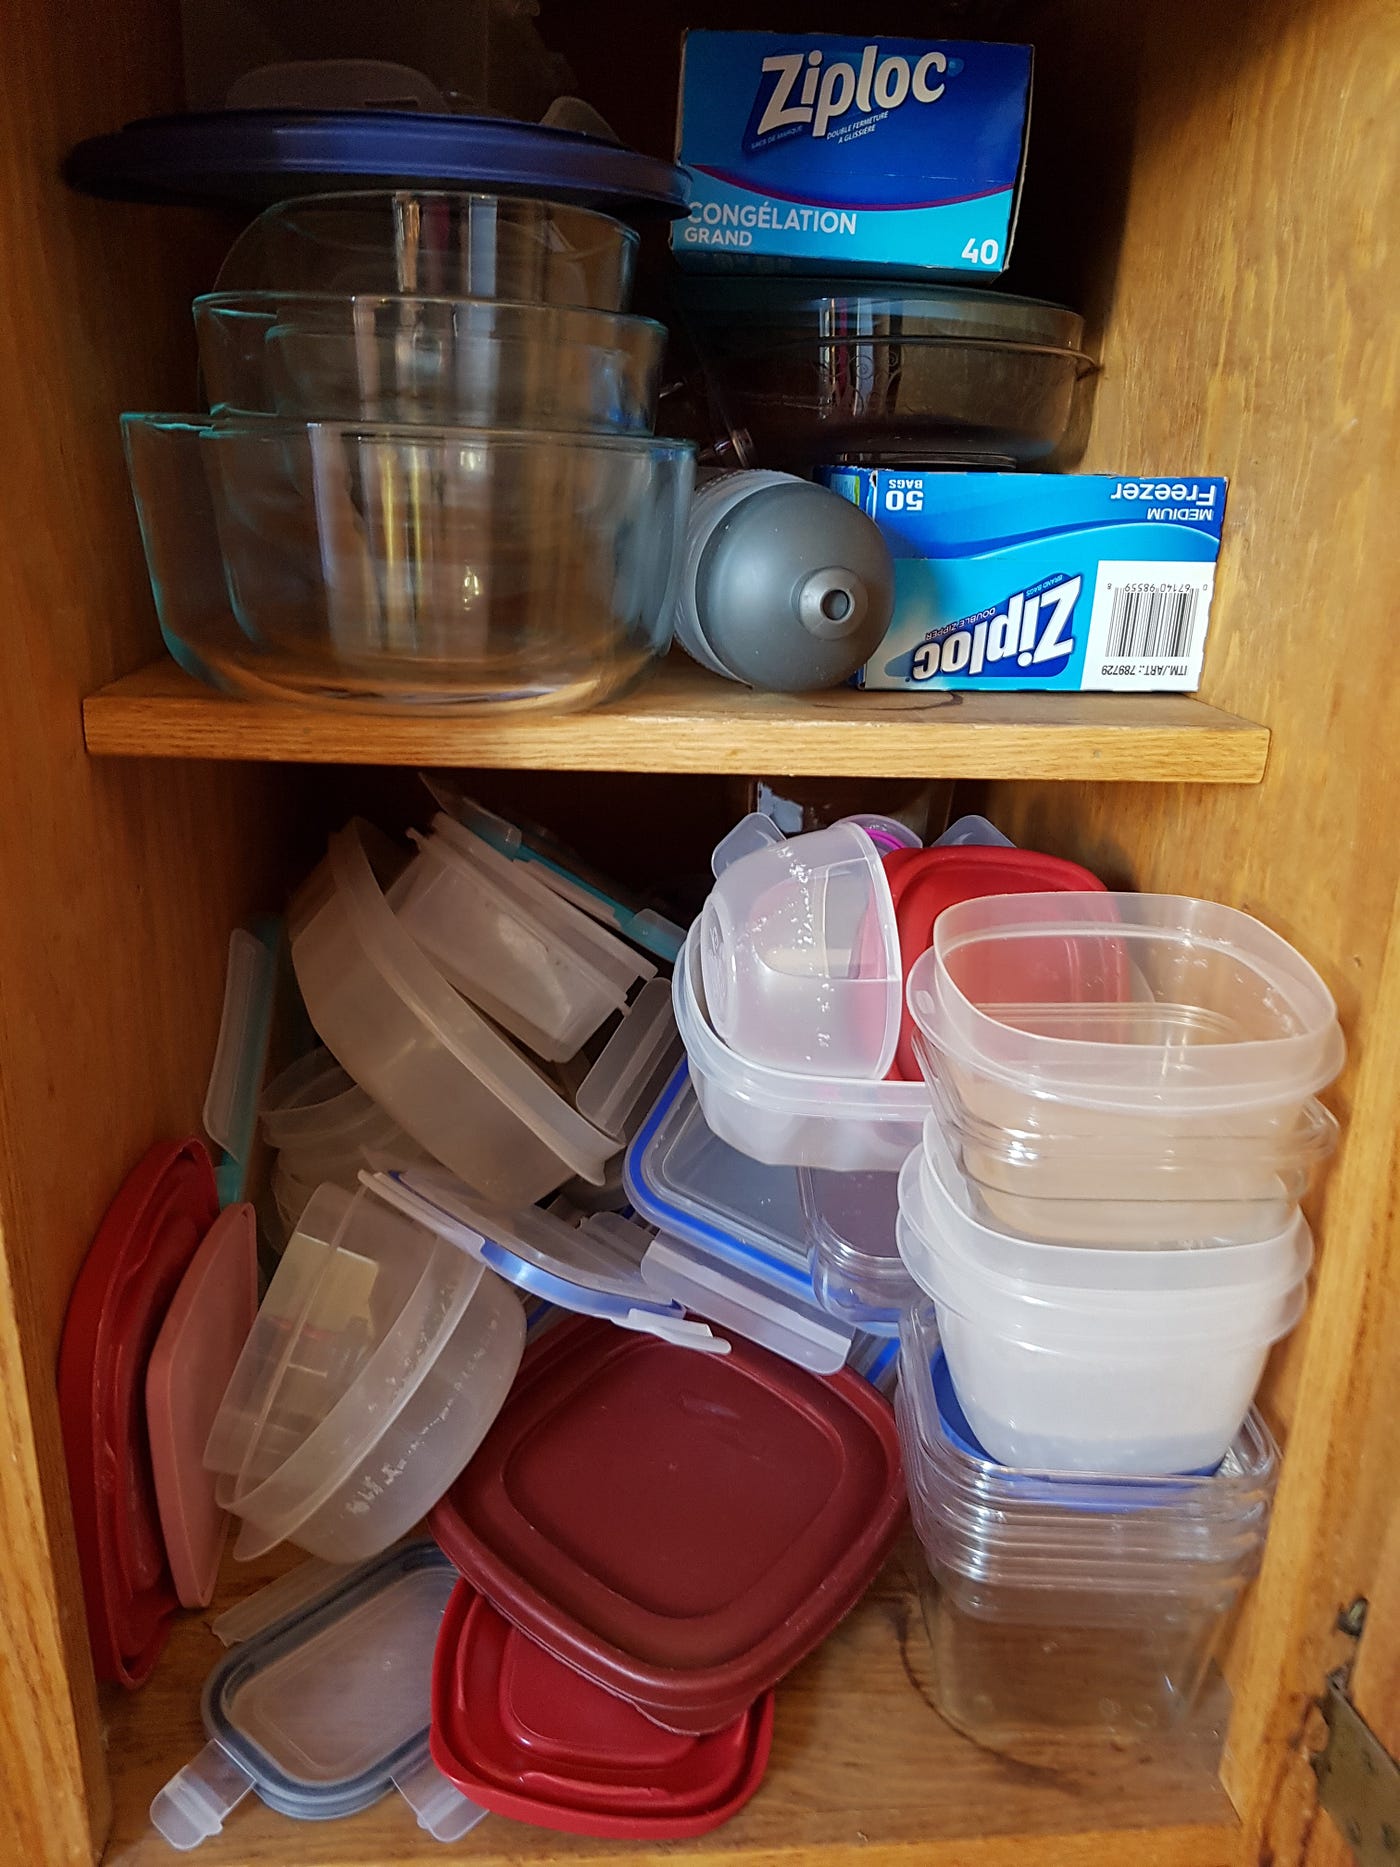 Moved to a new house and my wife organized the tupperware drawer